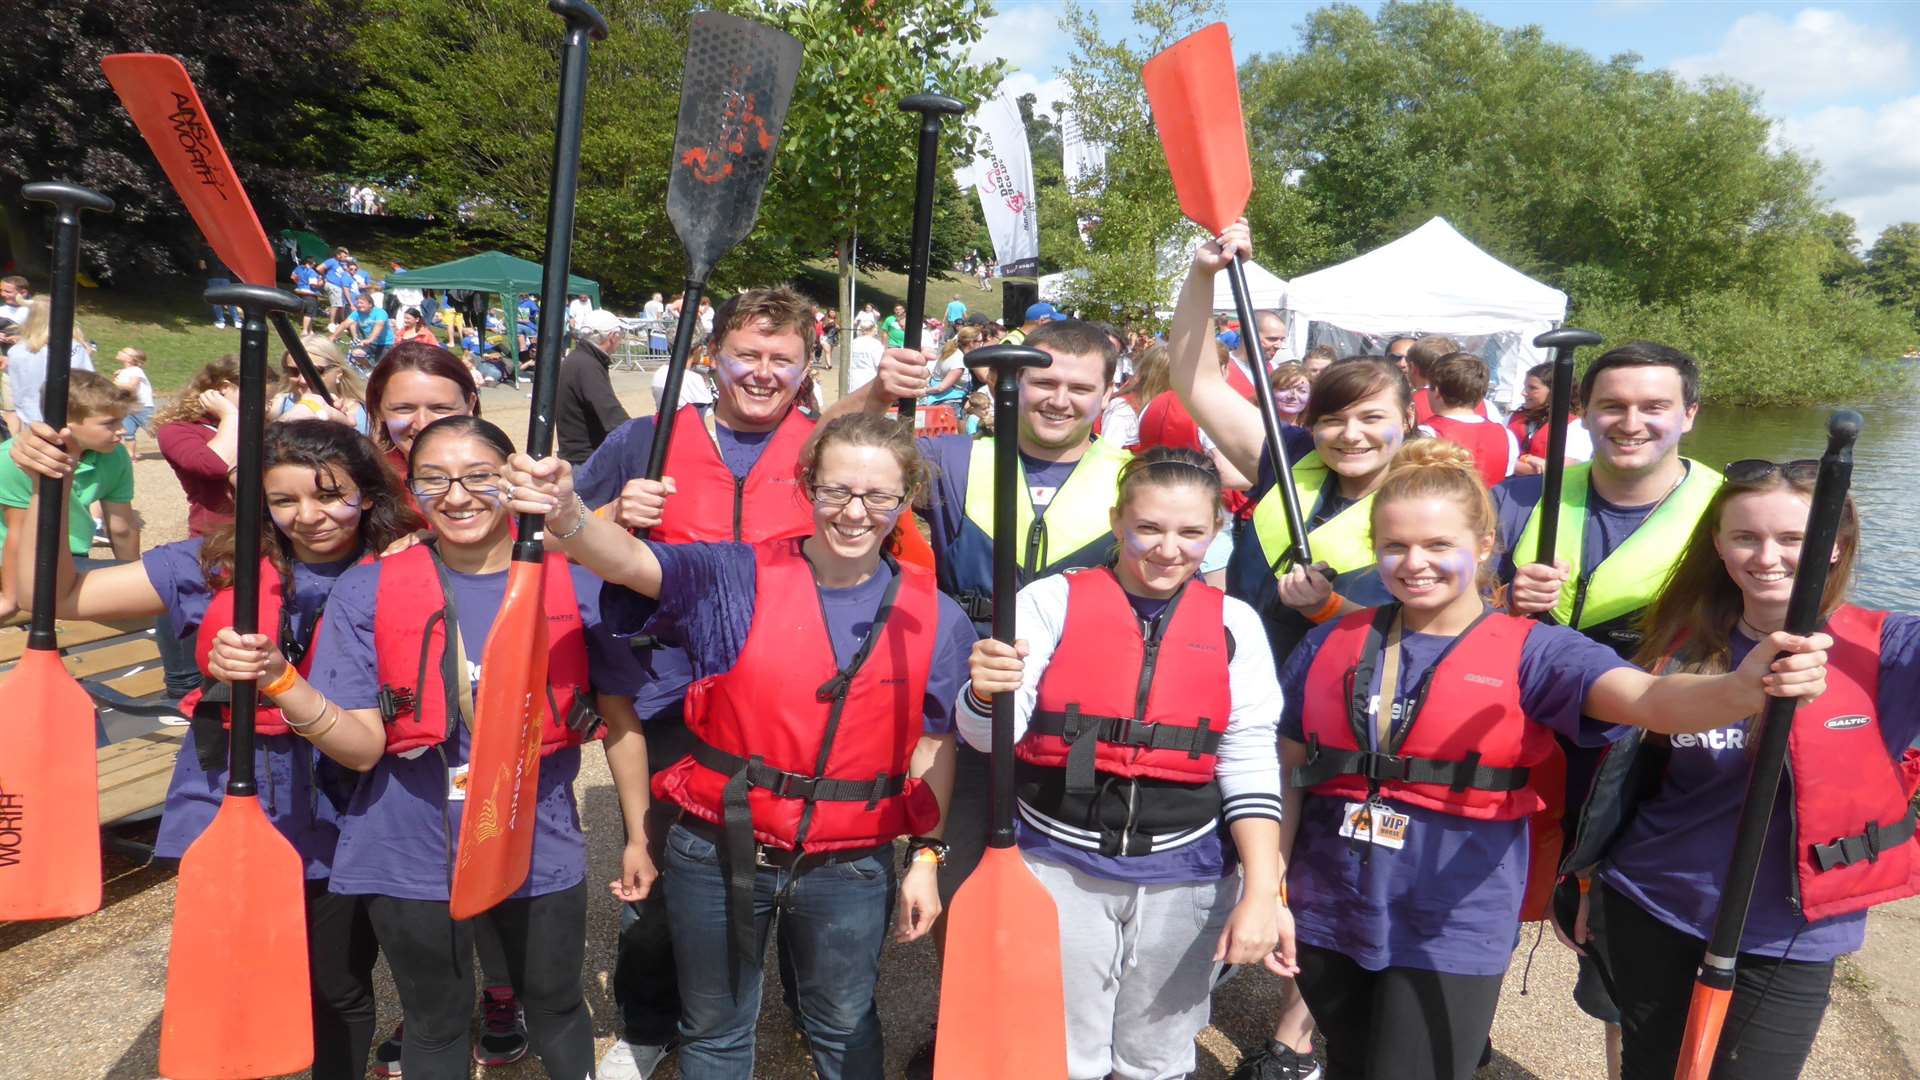 The Kent Reliance Team at the KM Dragon Boat Race in Mote Park, Maidstone, last year